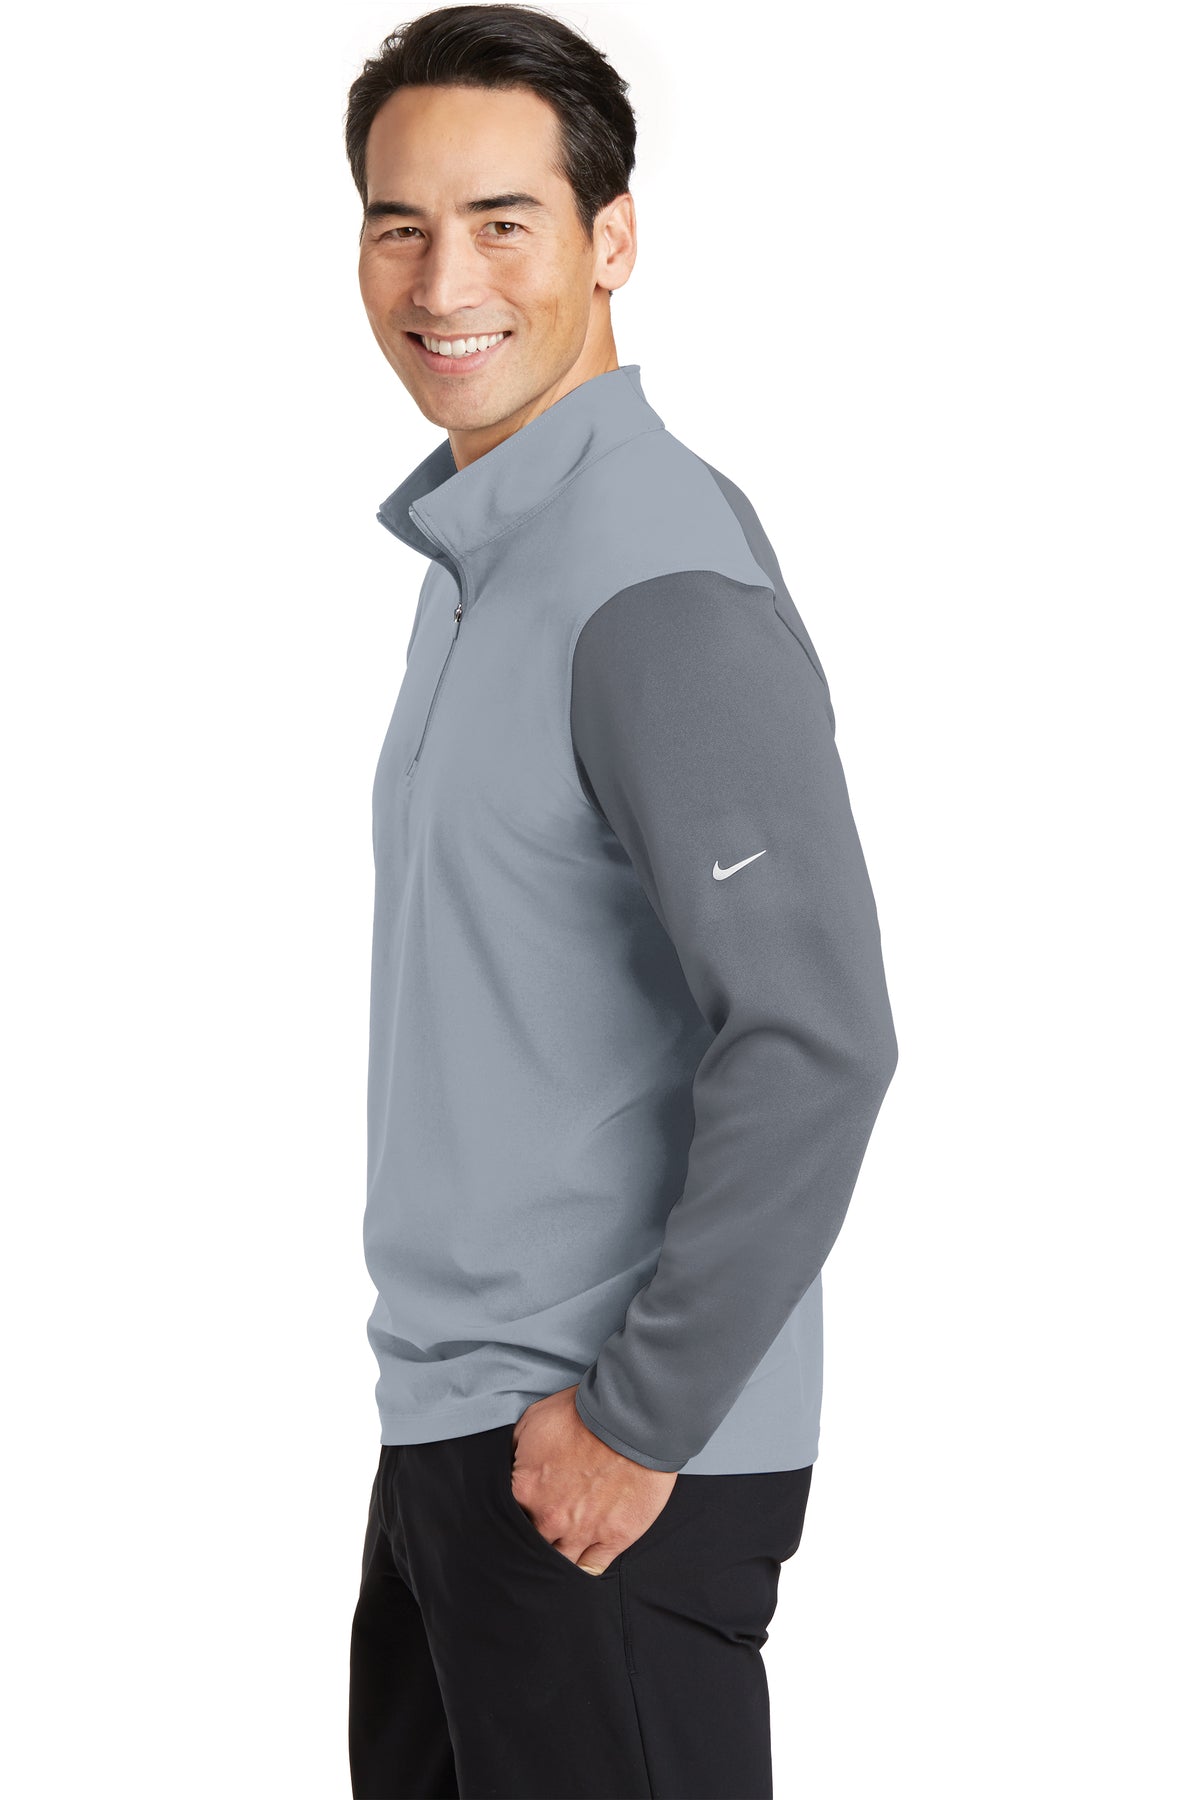 Nike Dri-FIT Fabric Mix 1/2-Zip Cover-Up-7